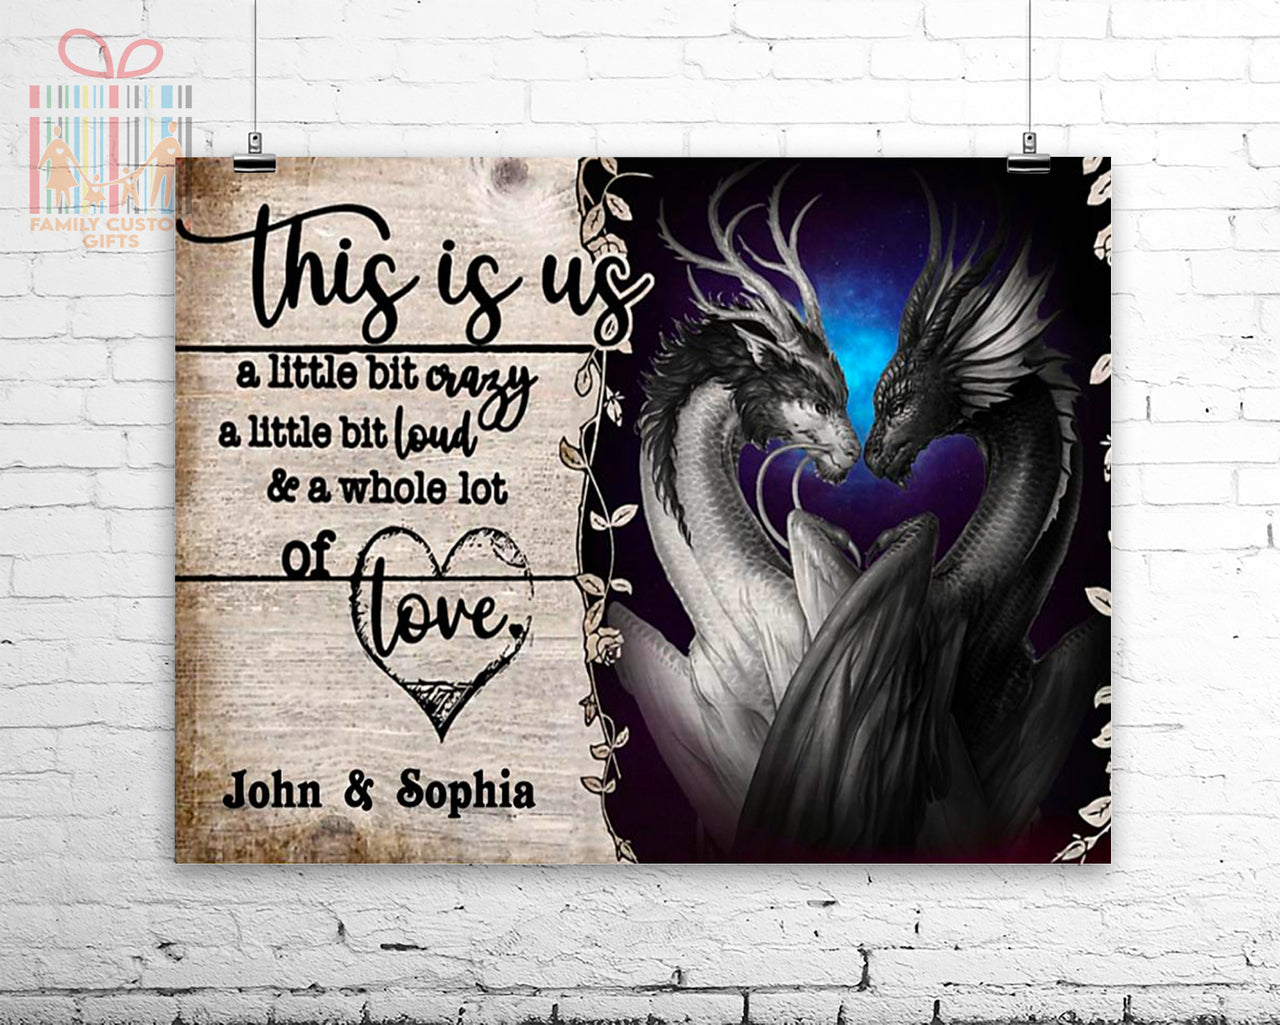 Custom Poster Prints Wall Art Dragon A Little Bit Personalized Gifts Wall Decor - Gift for Her & Him